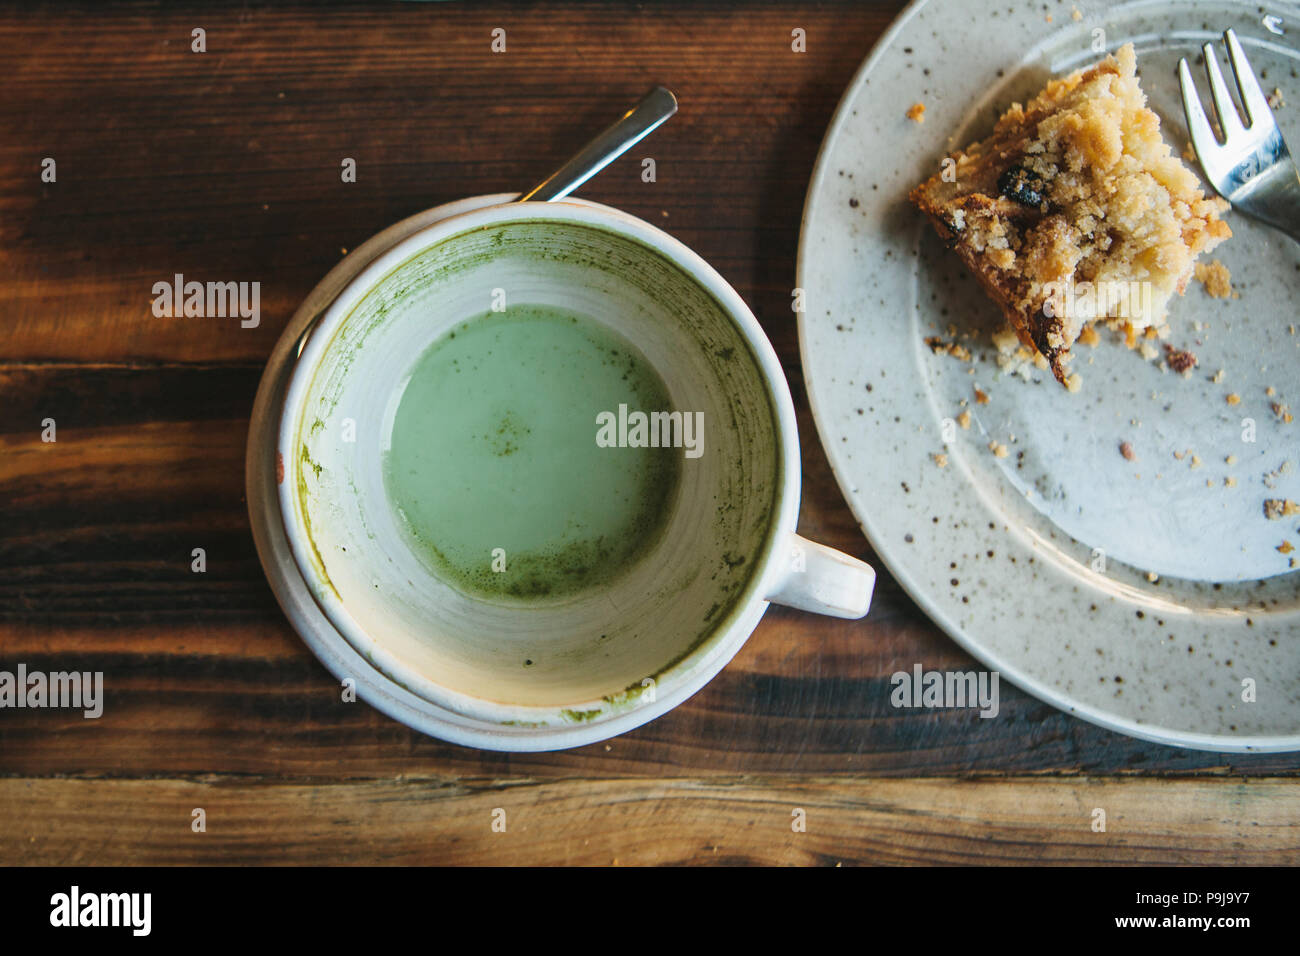 Top view. A dirty plate and an empty cup of Matcha tea. The half-eaten cupcake on a plate. Empty dishes after eating on a wooden table in a cafe. The  Stock Photo